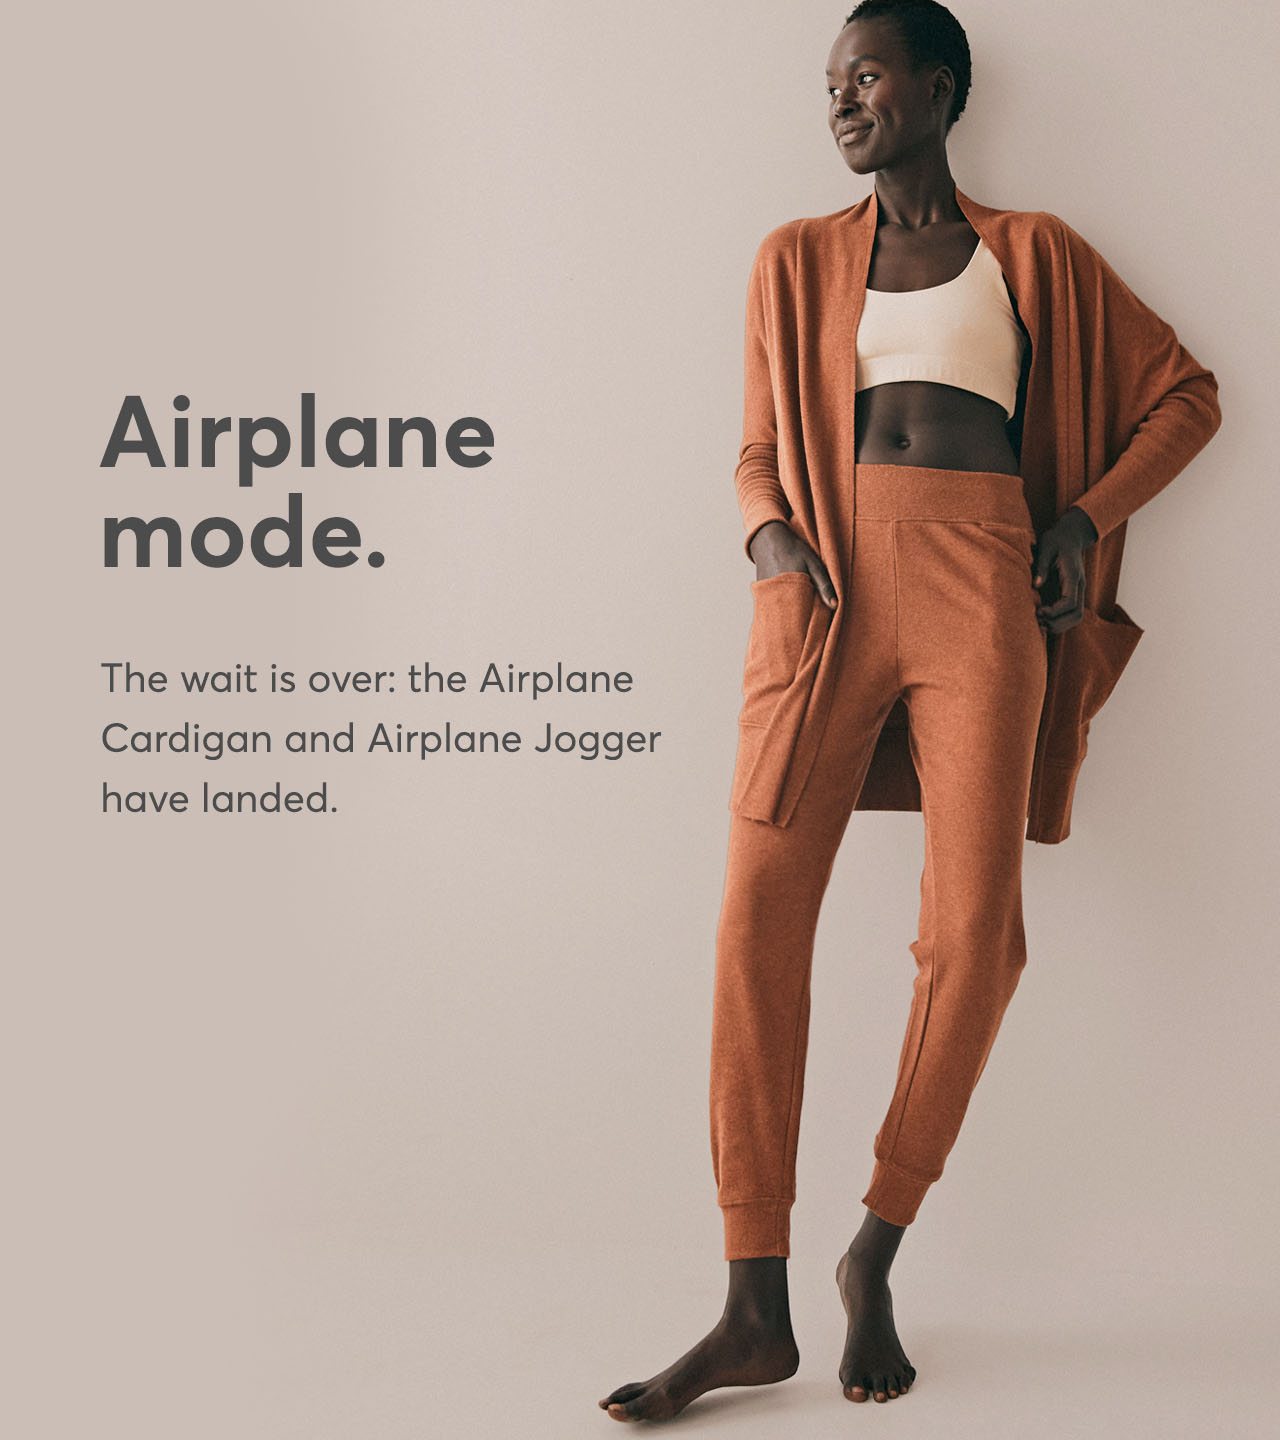 Airplane mode. The wait is over: the Airplane Cardigan and Airplane Jogger have landed.